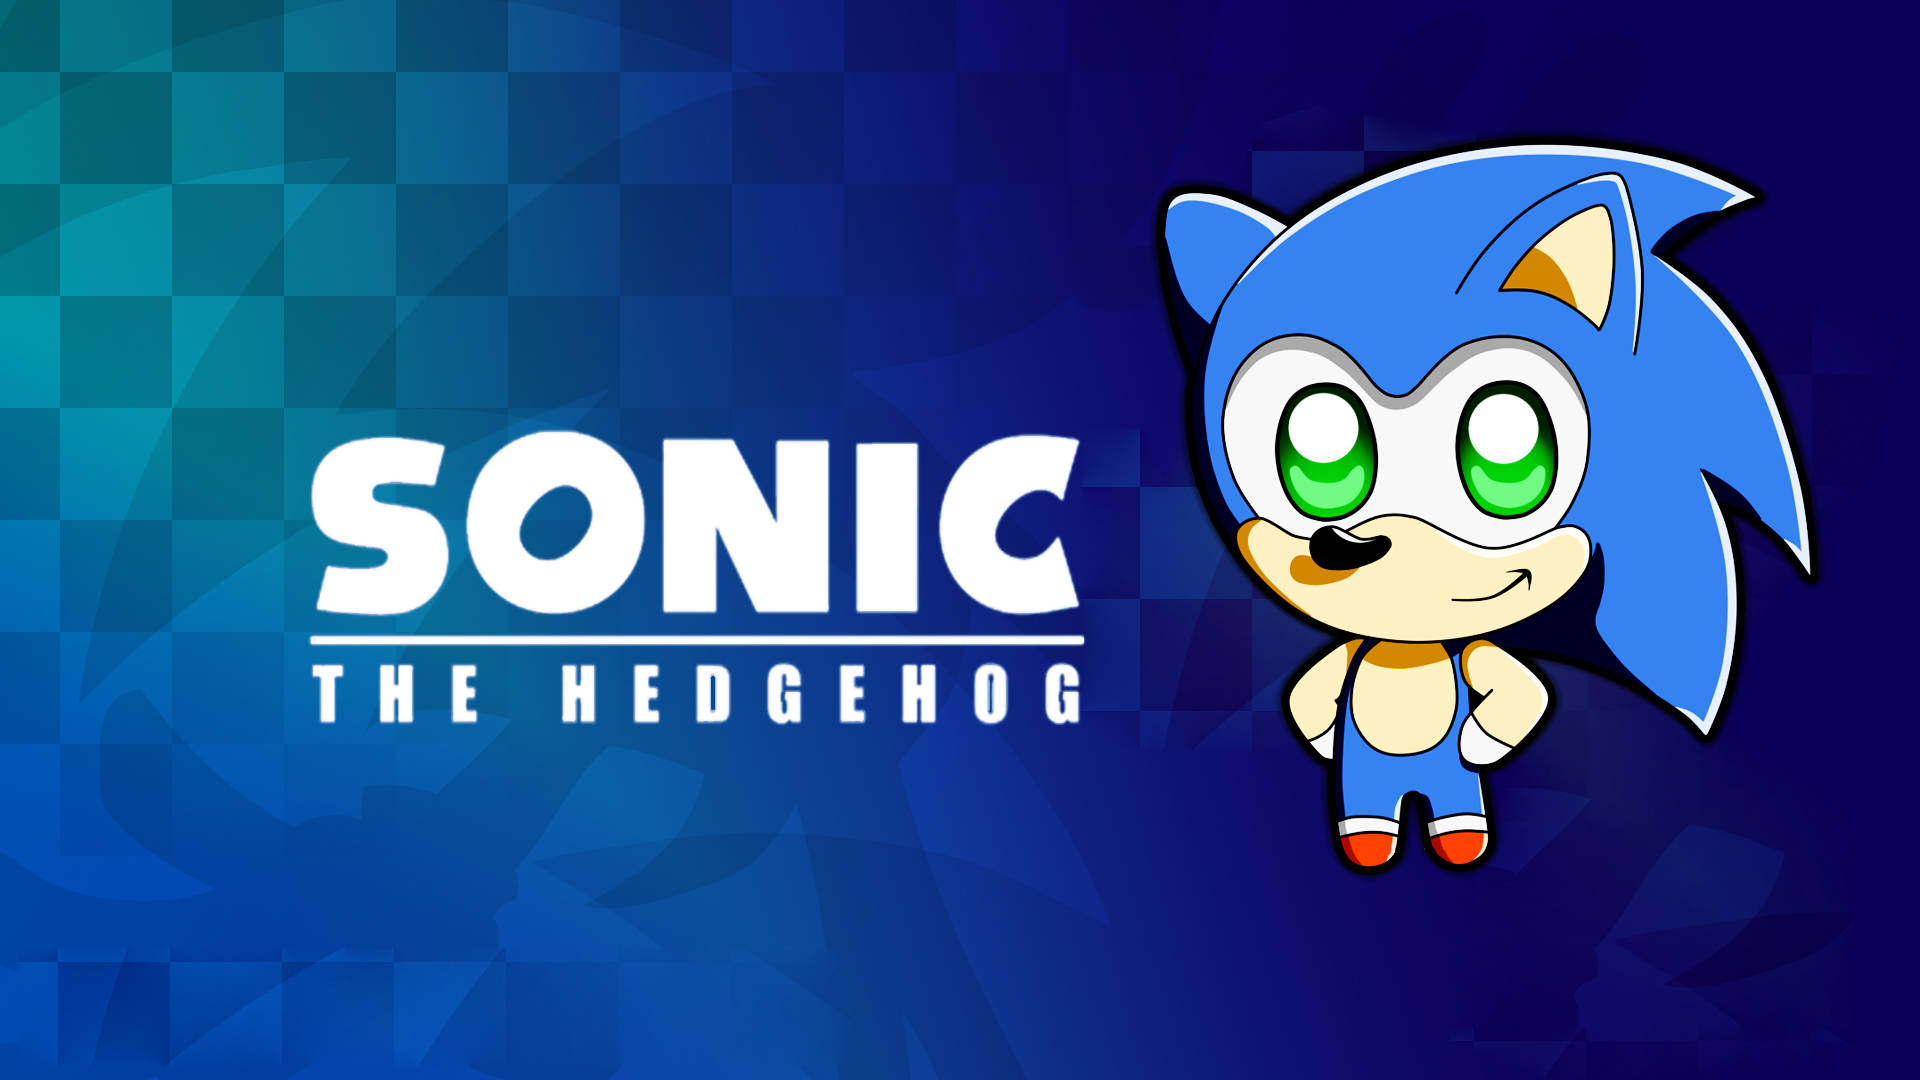 Play as the iconic video game character, Sonic the Hedgehog Wallpaper